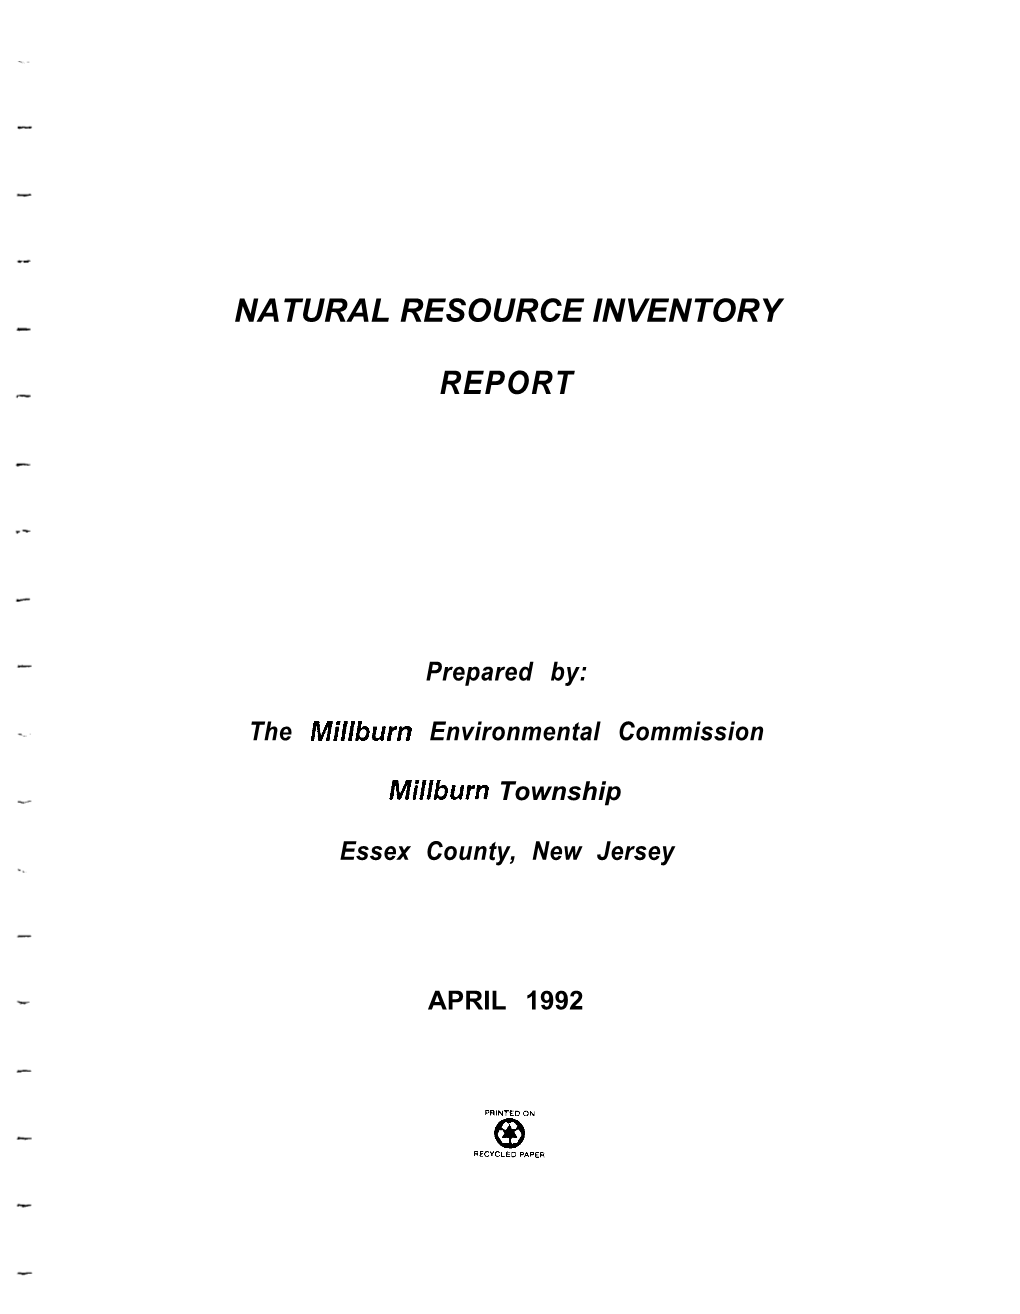 Natural Resource Inventory Report